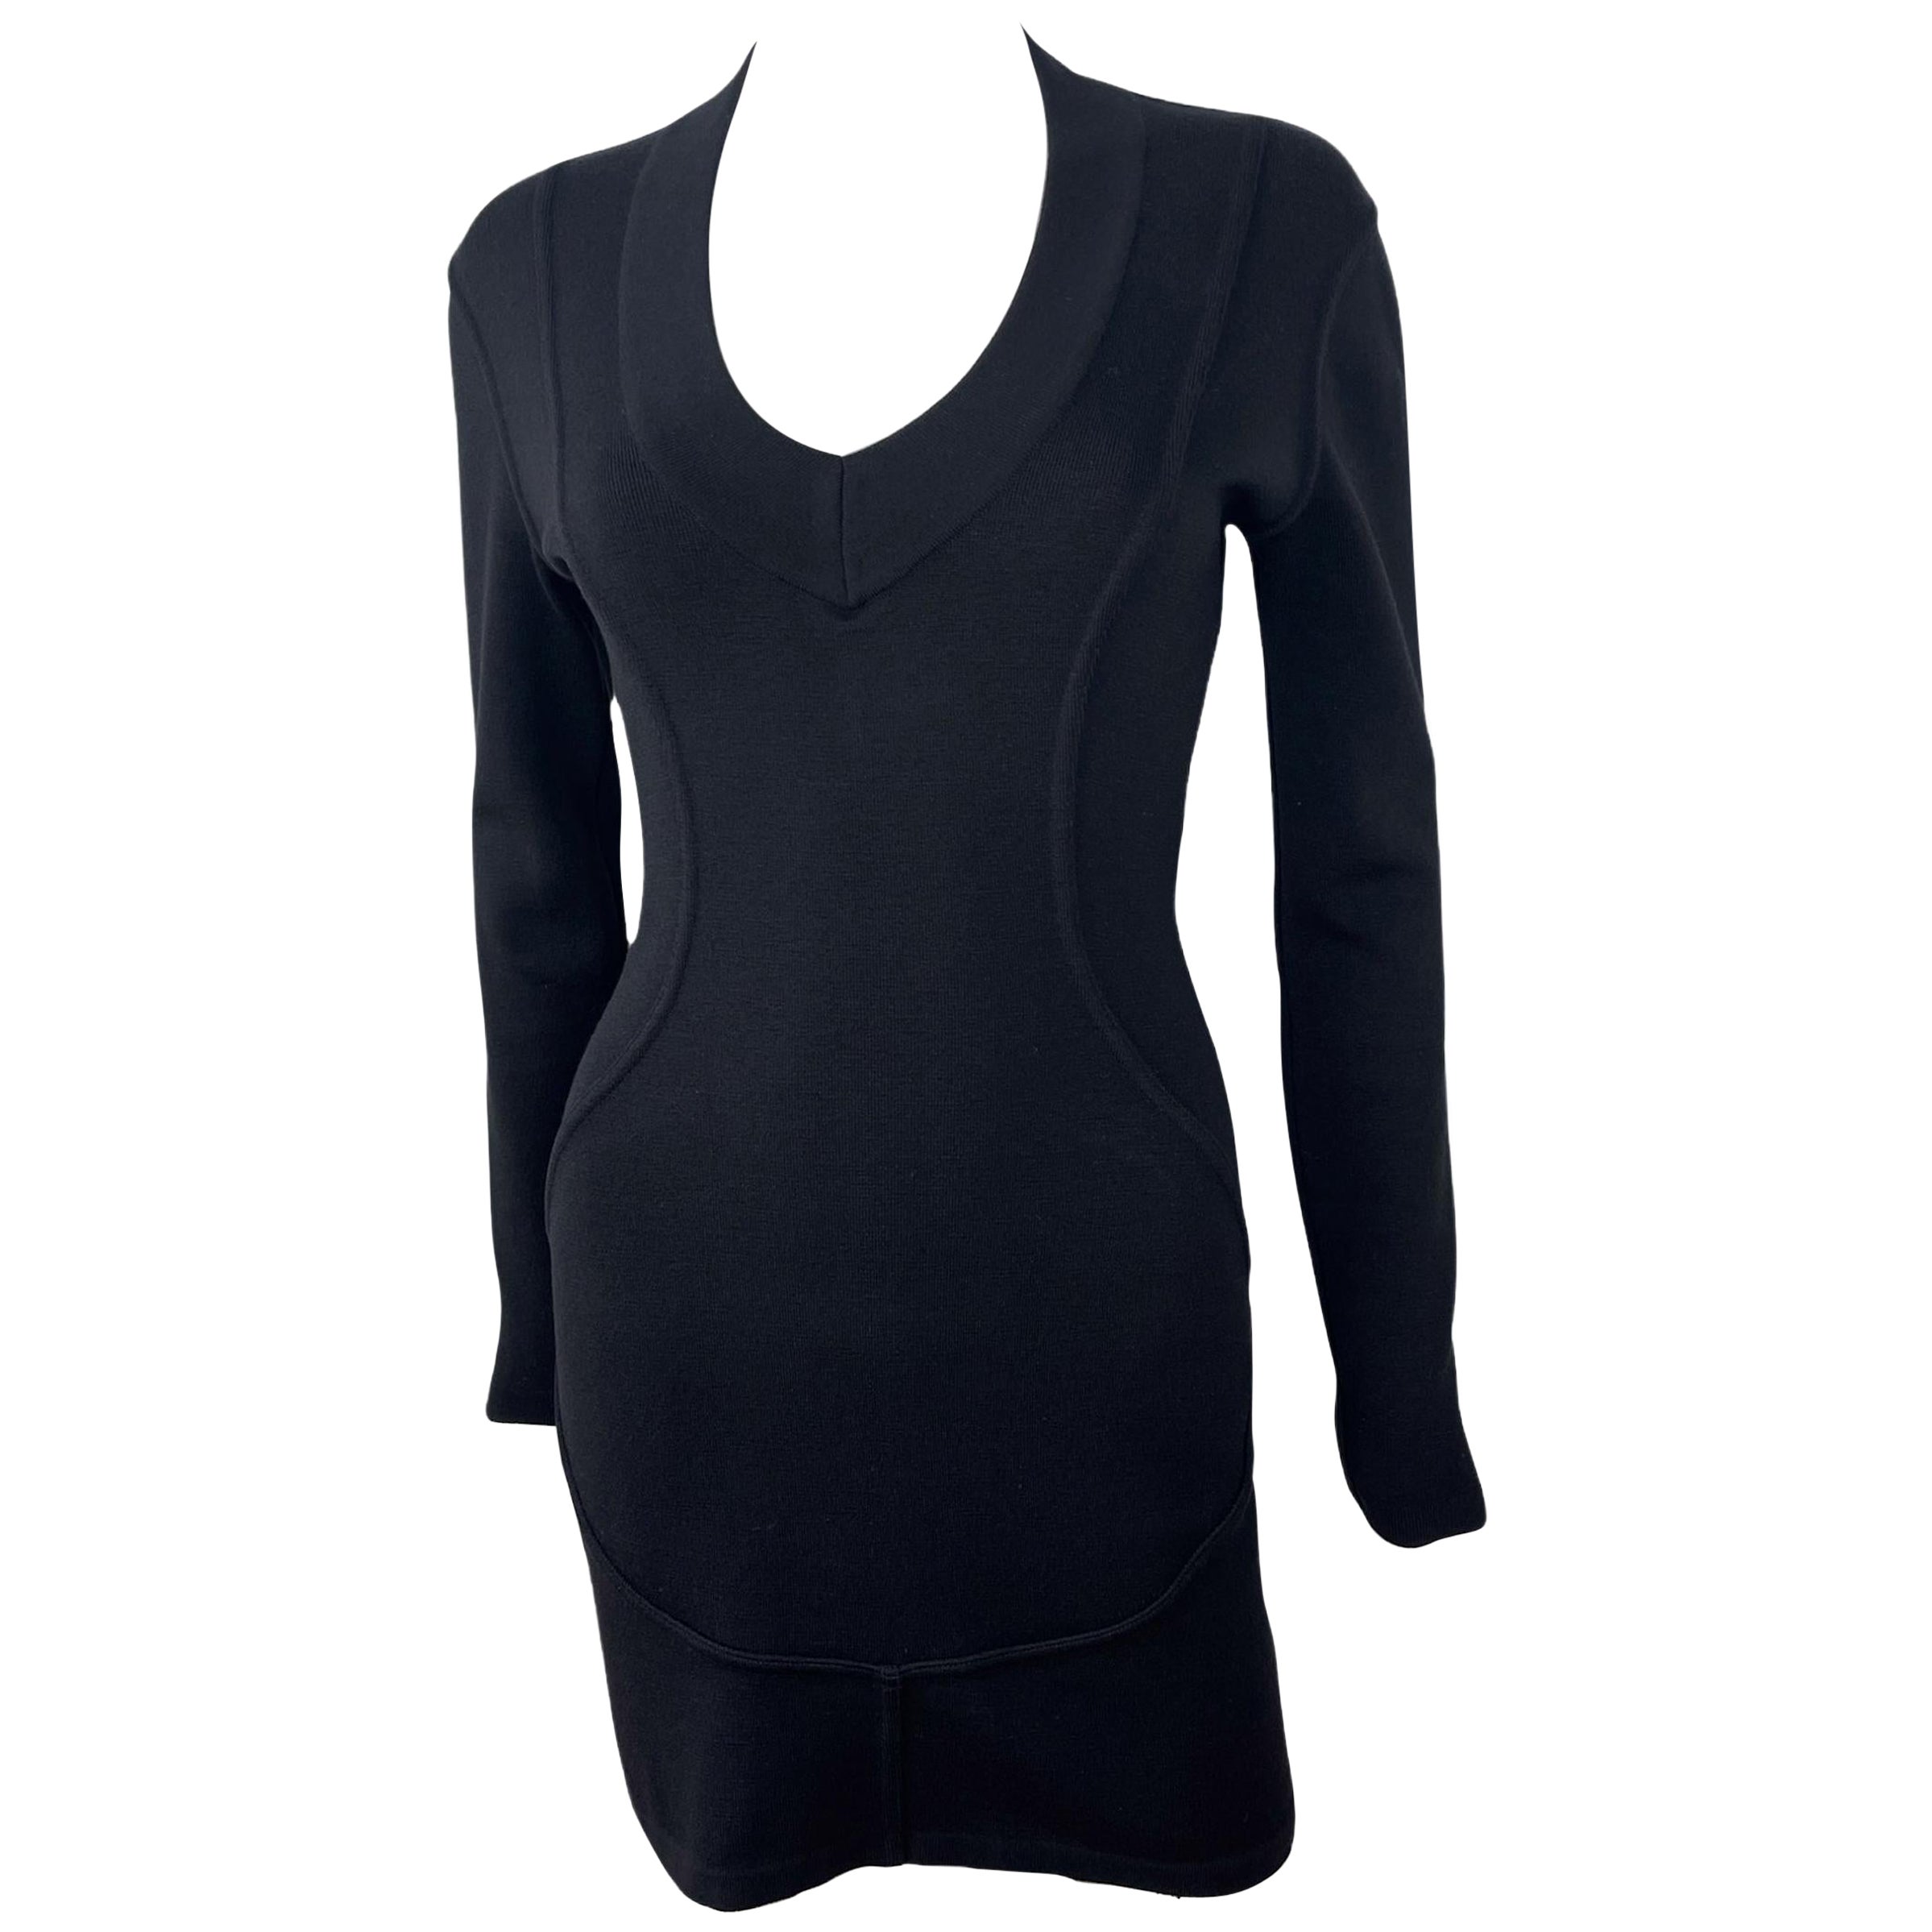 ALAÏA, Made in Italy, FW1990.
Bodycon black mini dress designed by Azzedine Alaïa for Fall-Winter 1990.
Deep V neck, long sleeves, short length.
86% wool - 10% nylon - 4% elastane

Good condition - small defect at the end of the collar, shown in